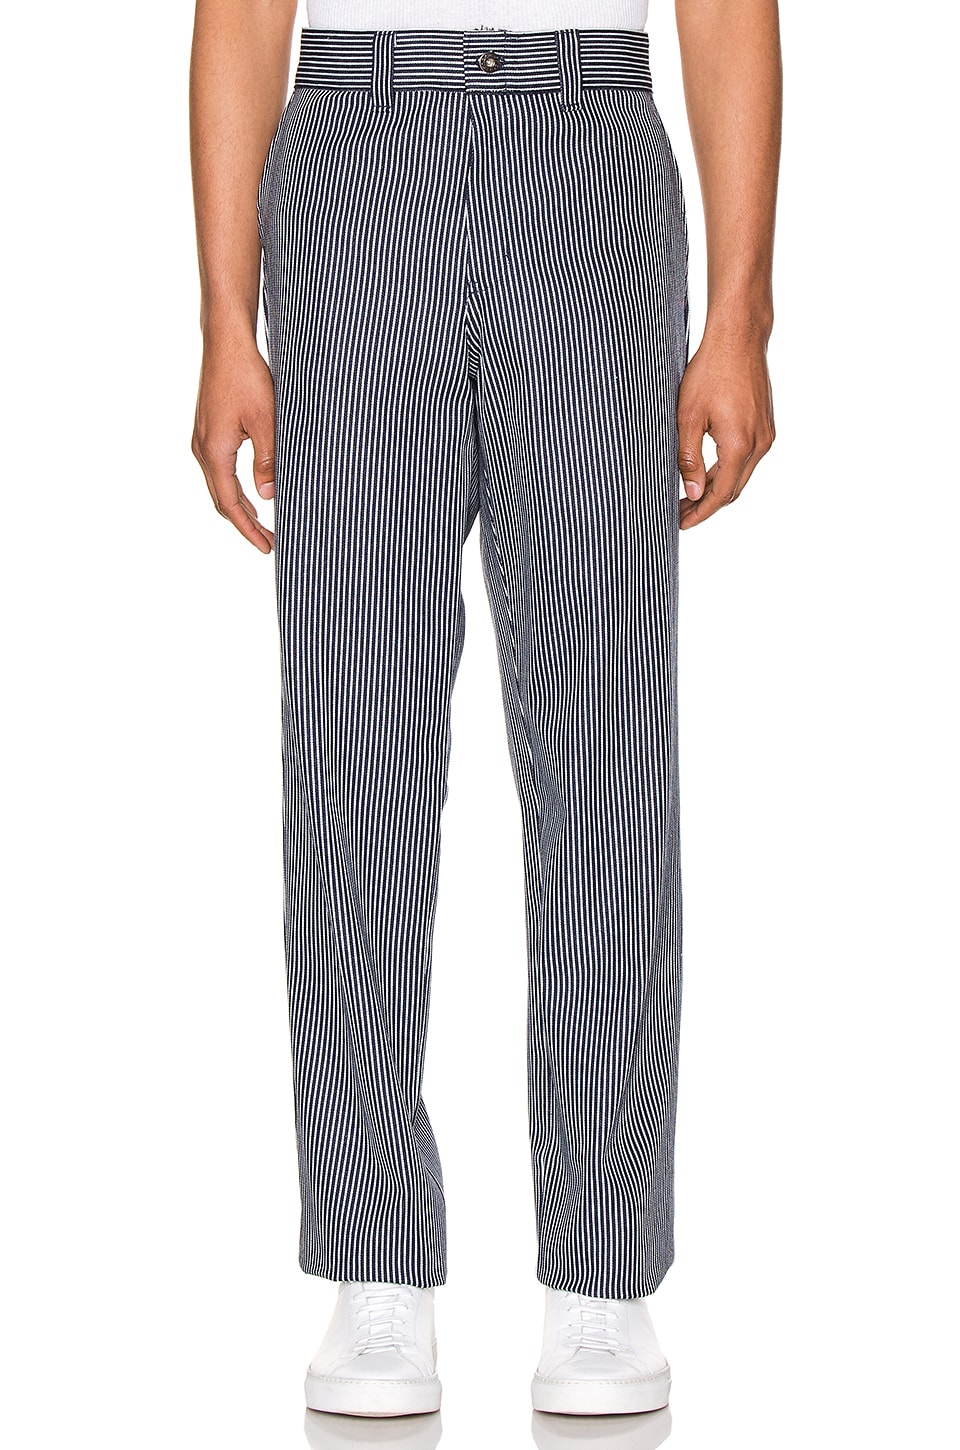 Dickies '67 Slim Fit Twill Hickory Stripe Pant in Hickory Stripe | REVOLVE